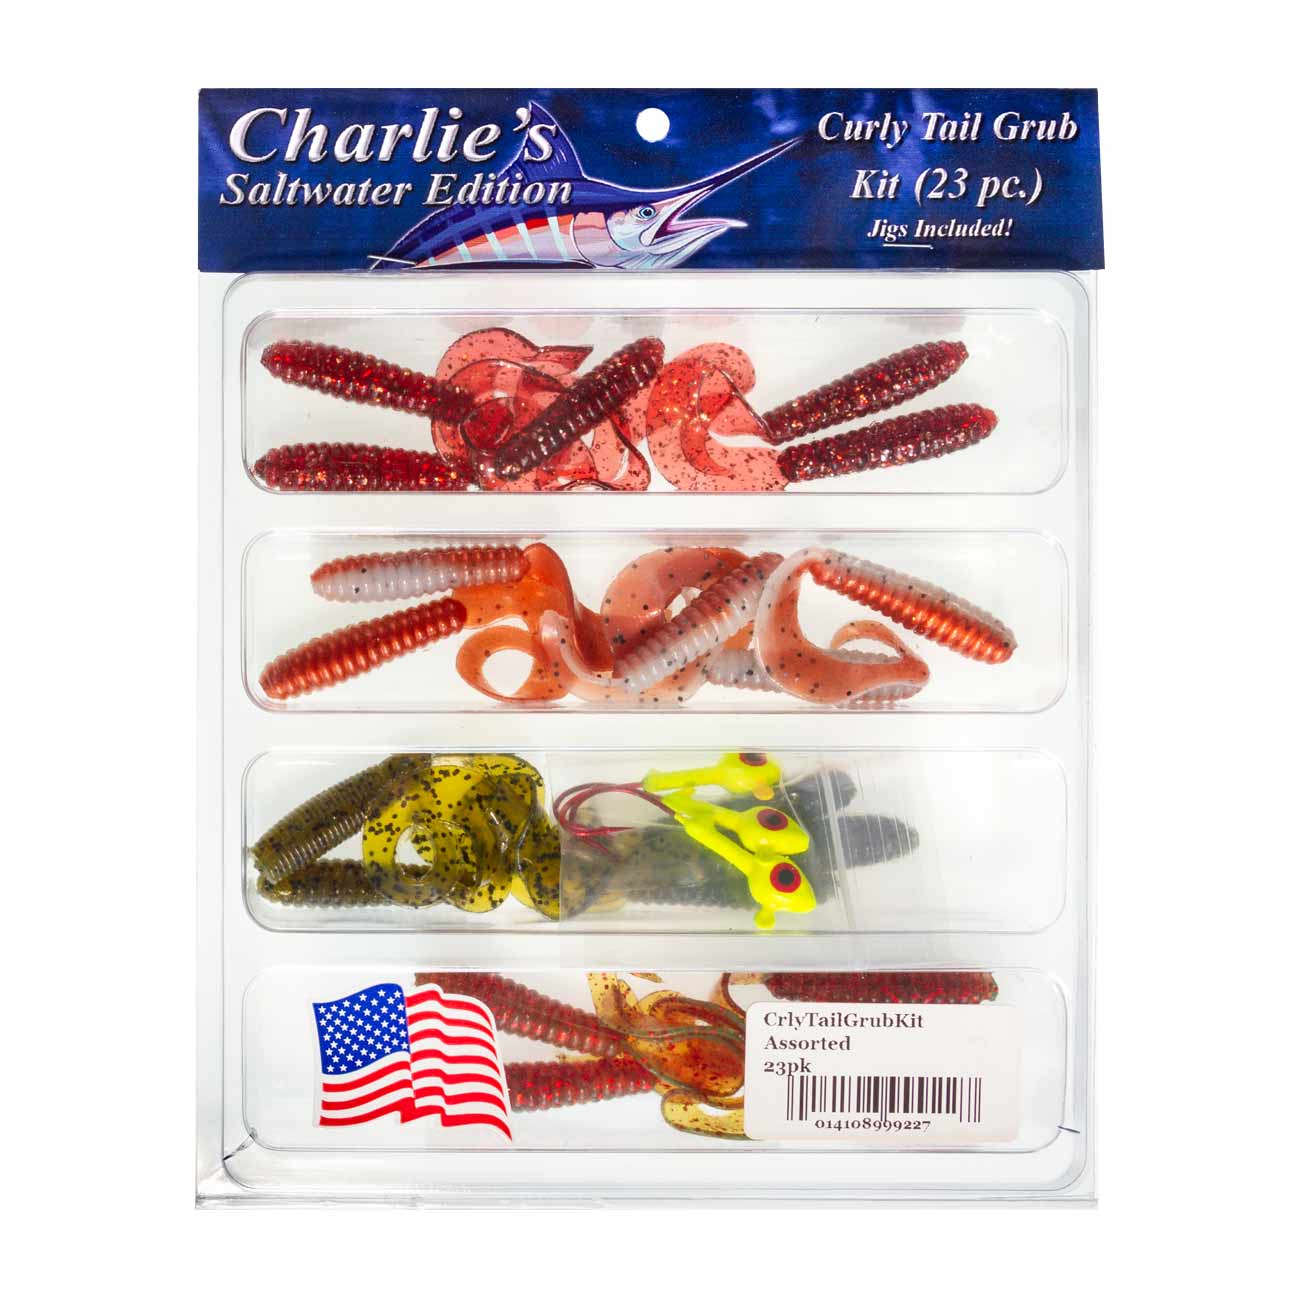 Charlie's Worms 4 inch Curly Tail Grub Kit - Artificial Fishing Bait for Freshwater, Saltwater and Bass Fishing Scented Lure 23pc, Assorted